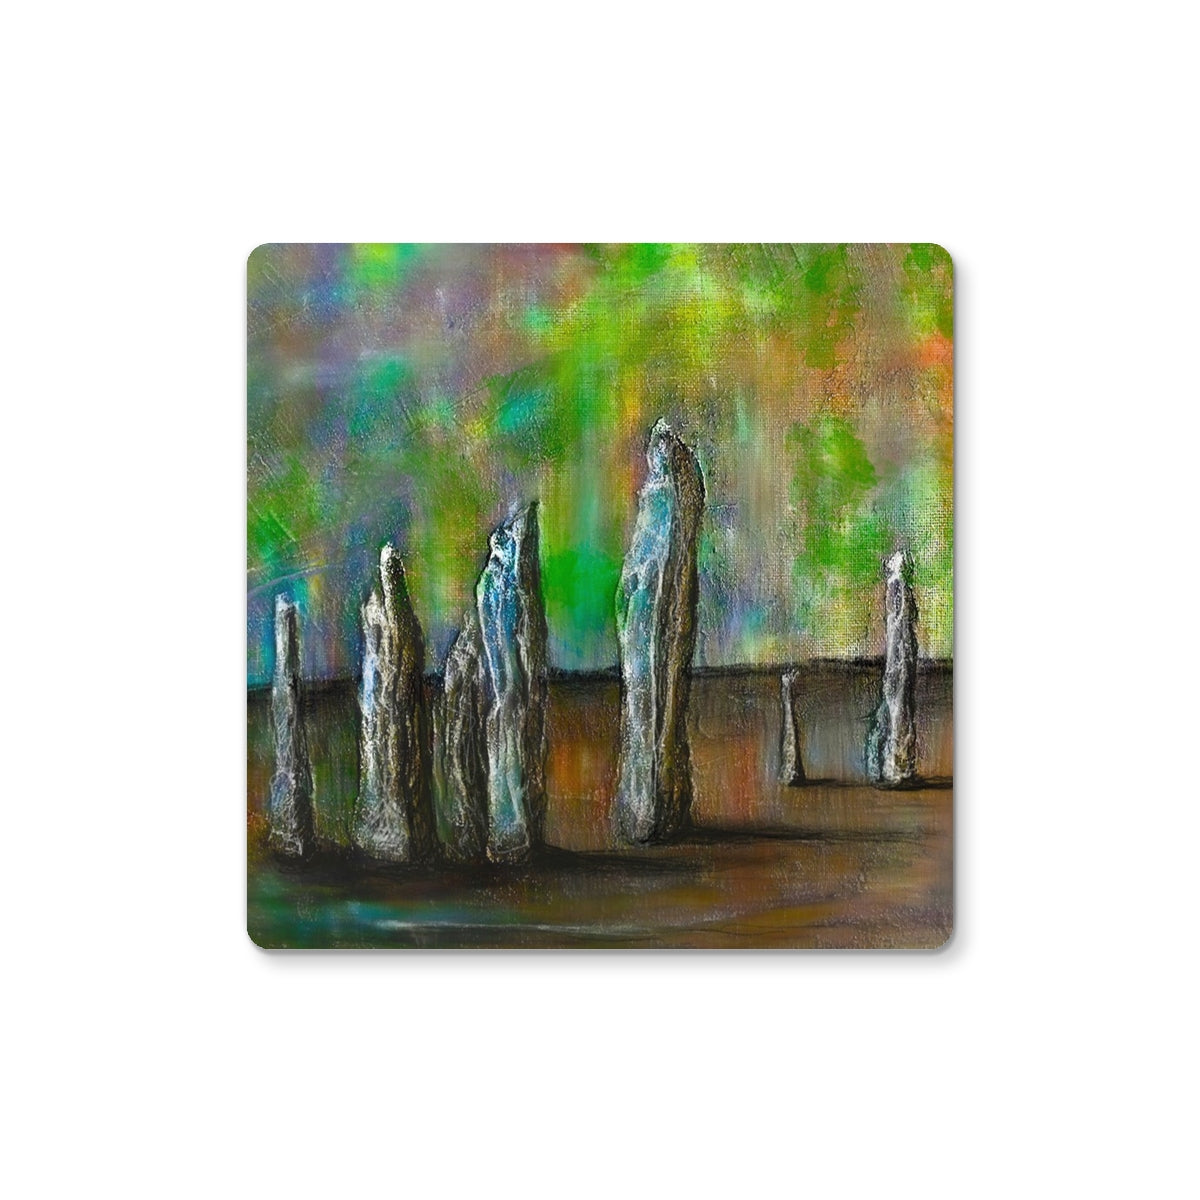 Callanish Northern Lights Art Gifts Coaster-Coasters-Hebridean Islands Art Gallery-Single Coaster-Paintings, Prints, Homeware, Art Gifts From Scotland By Scottish Artist Kevin Hunter